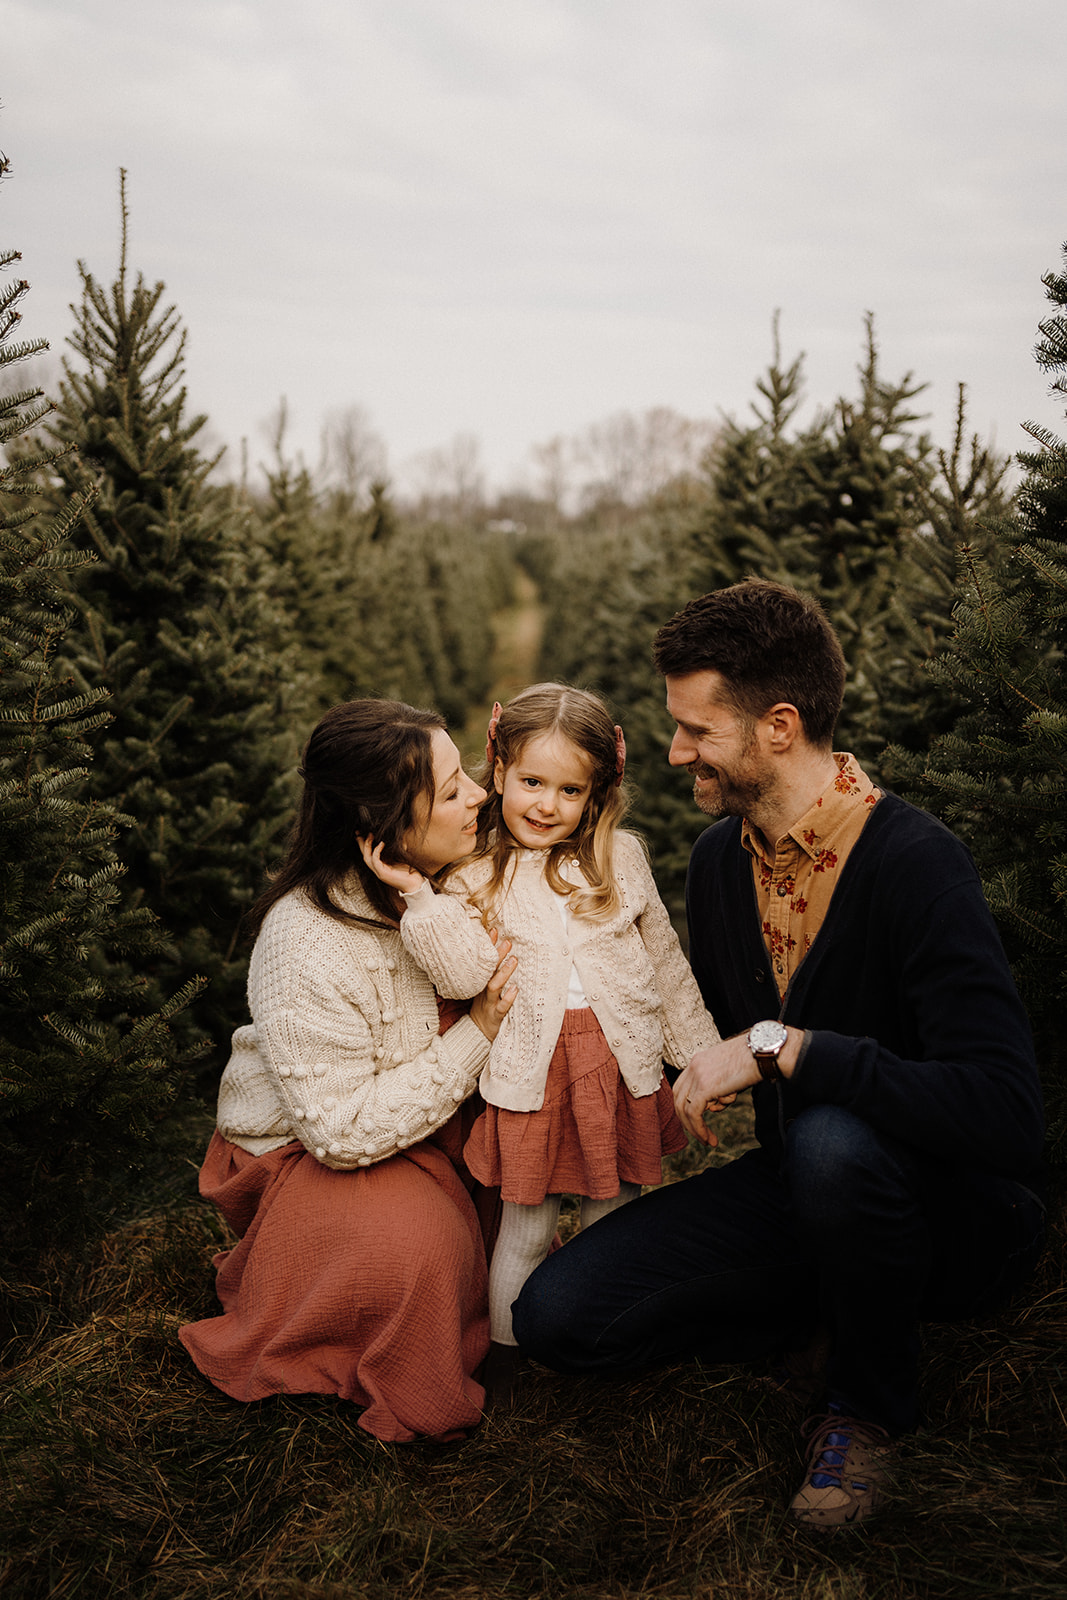 Parents kneeling with their child between Christmas Trees outside.